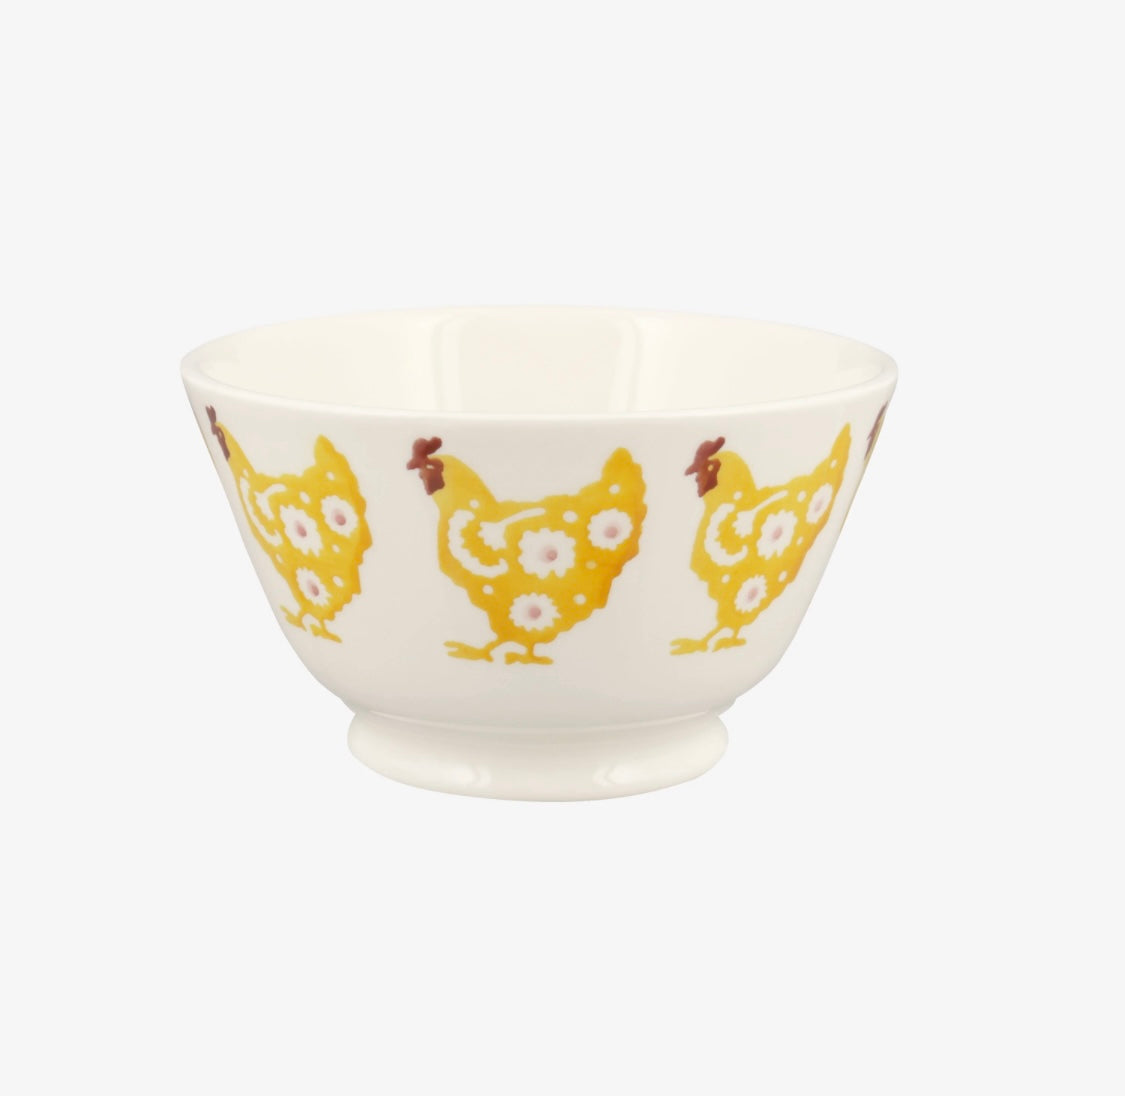 Yellow Hen Small Old Bowl